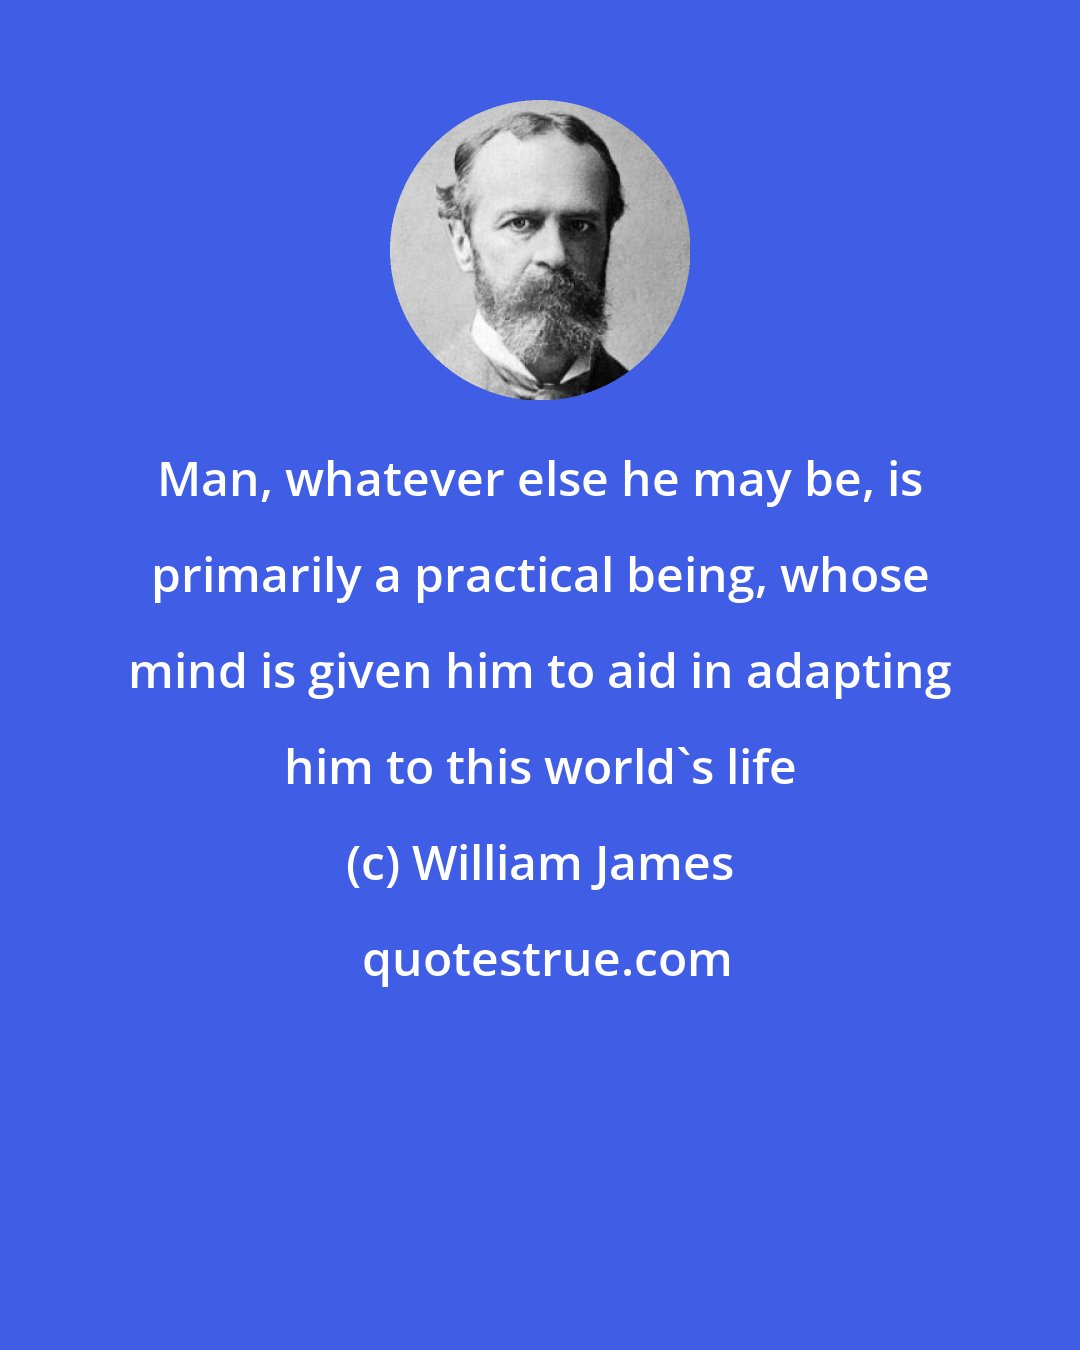 William James: Man, whatever else he may be, is primarily a practical being, whose mind is given him to aid in adapting him to this world's life